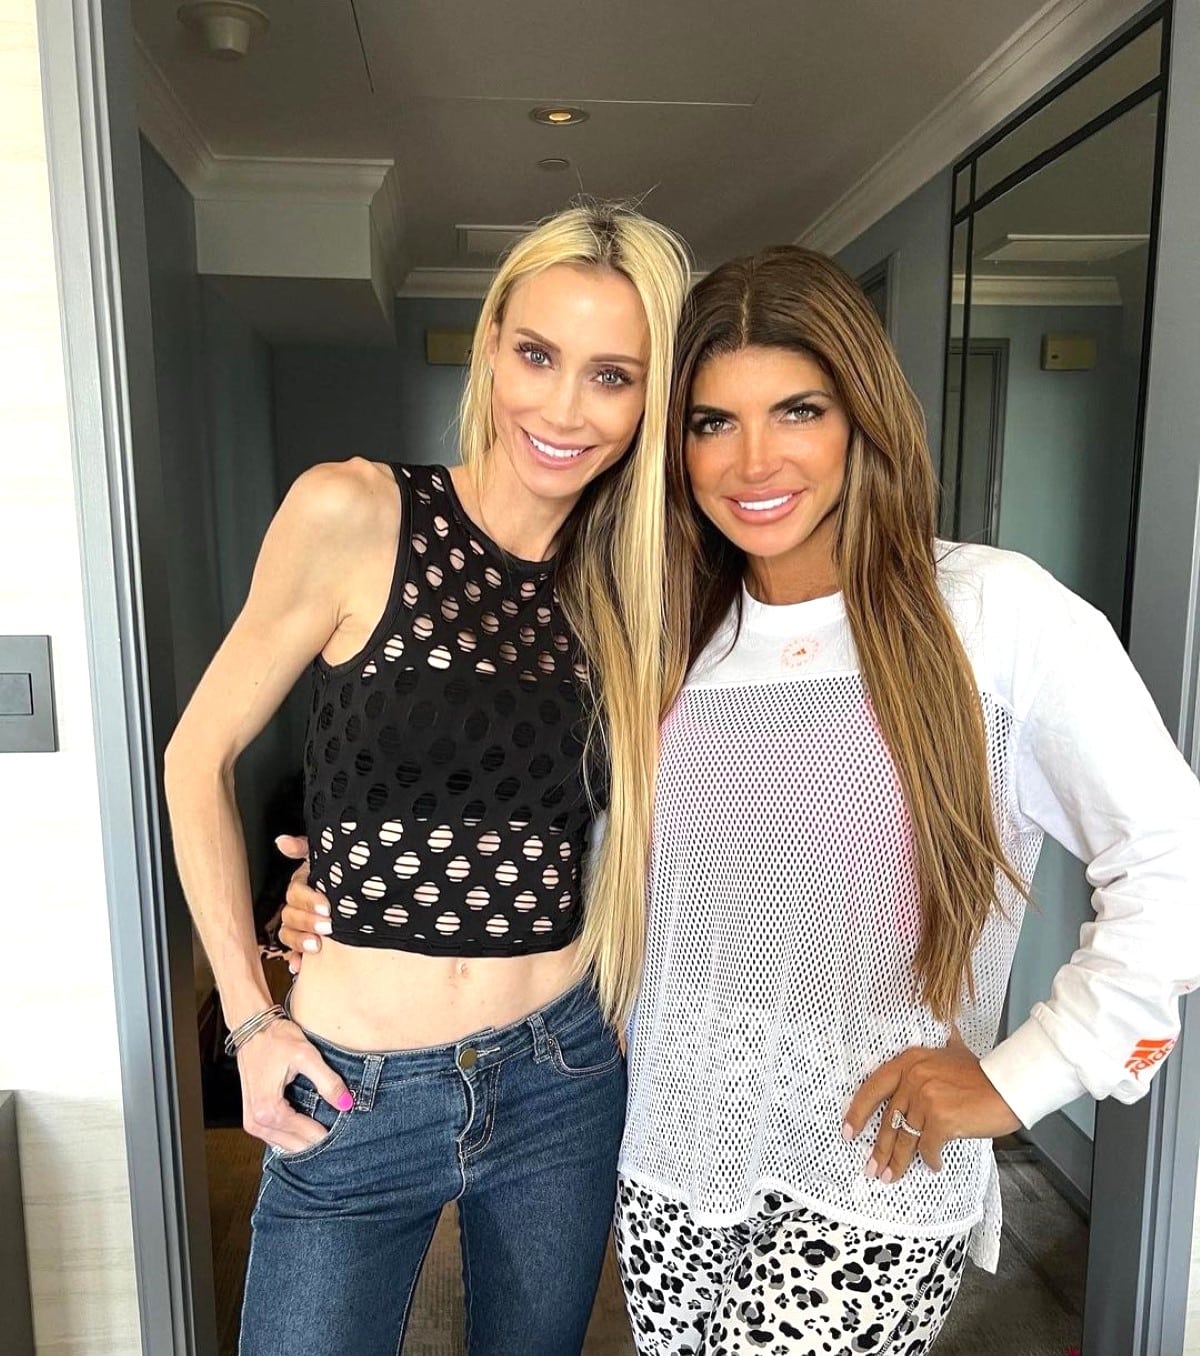 Teresa Giudice’s Ex Co-Host Melissa Pfeister Addresses Stepping Away from Podcast, Hints at “Terrible Lies” People Have Said, and Claims She Could “Say a Lot More” about Why She Left, as Fans React